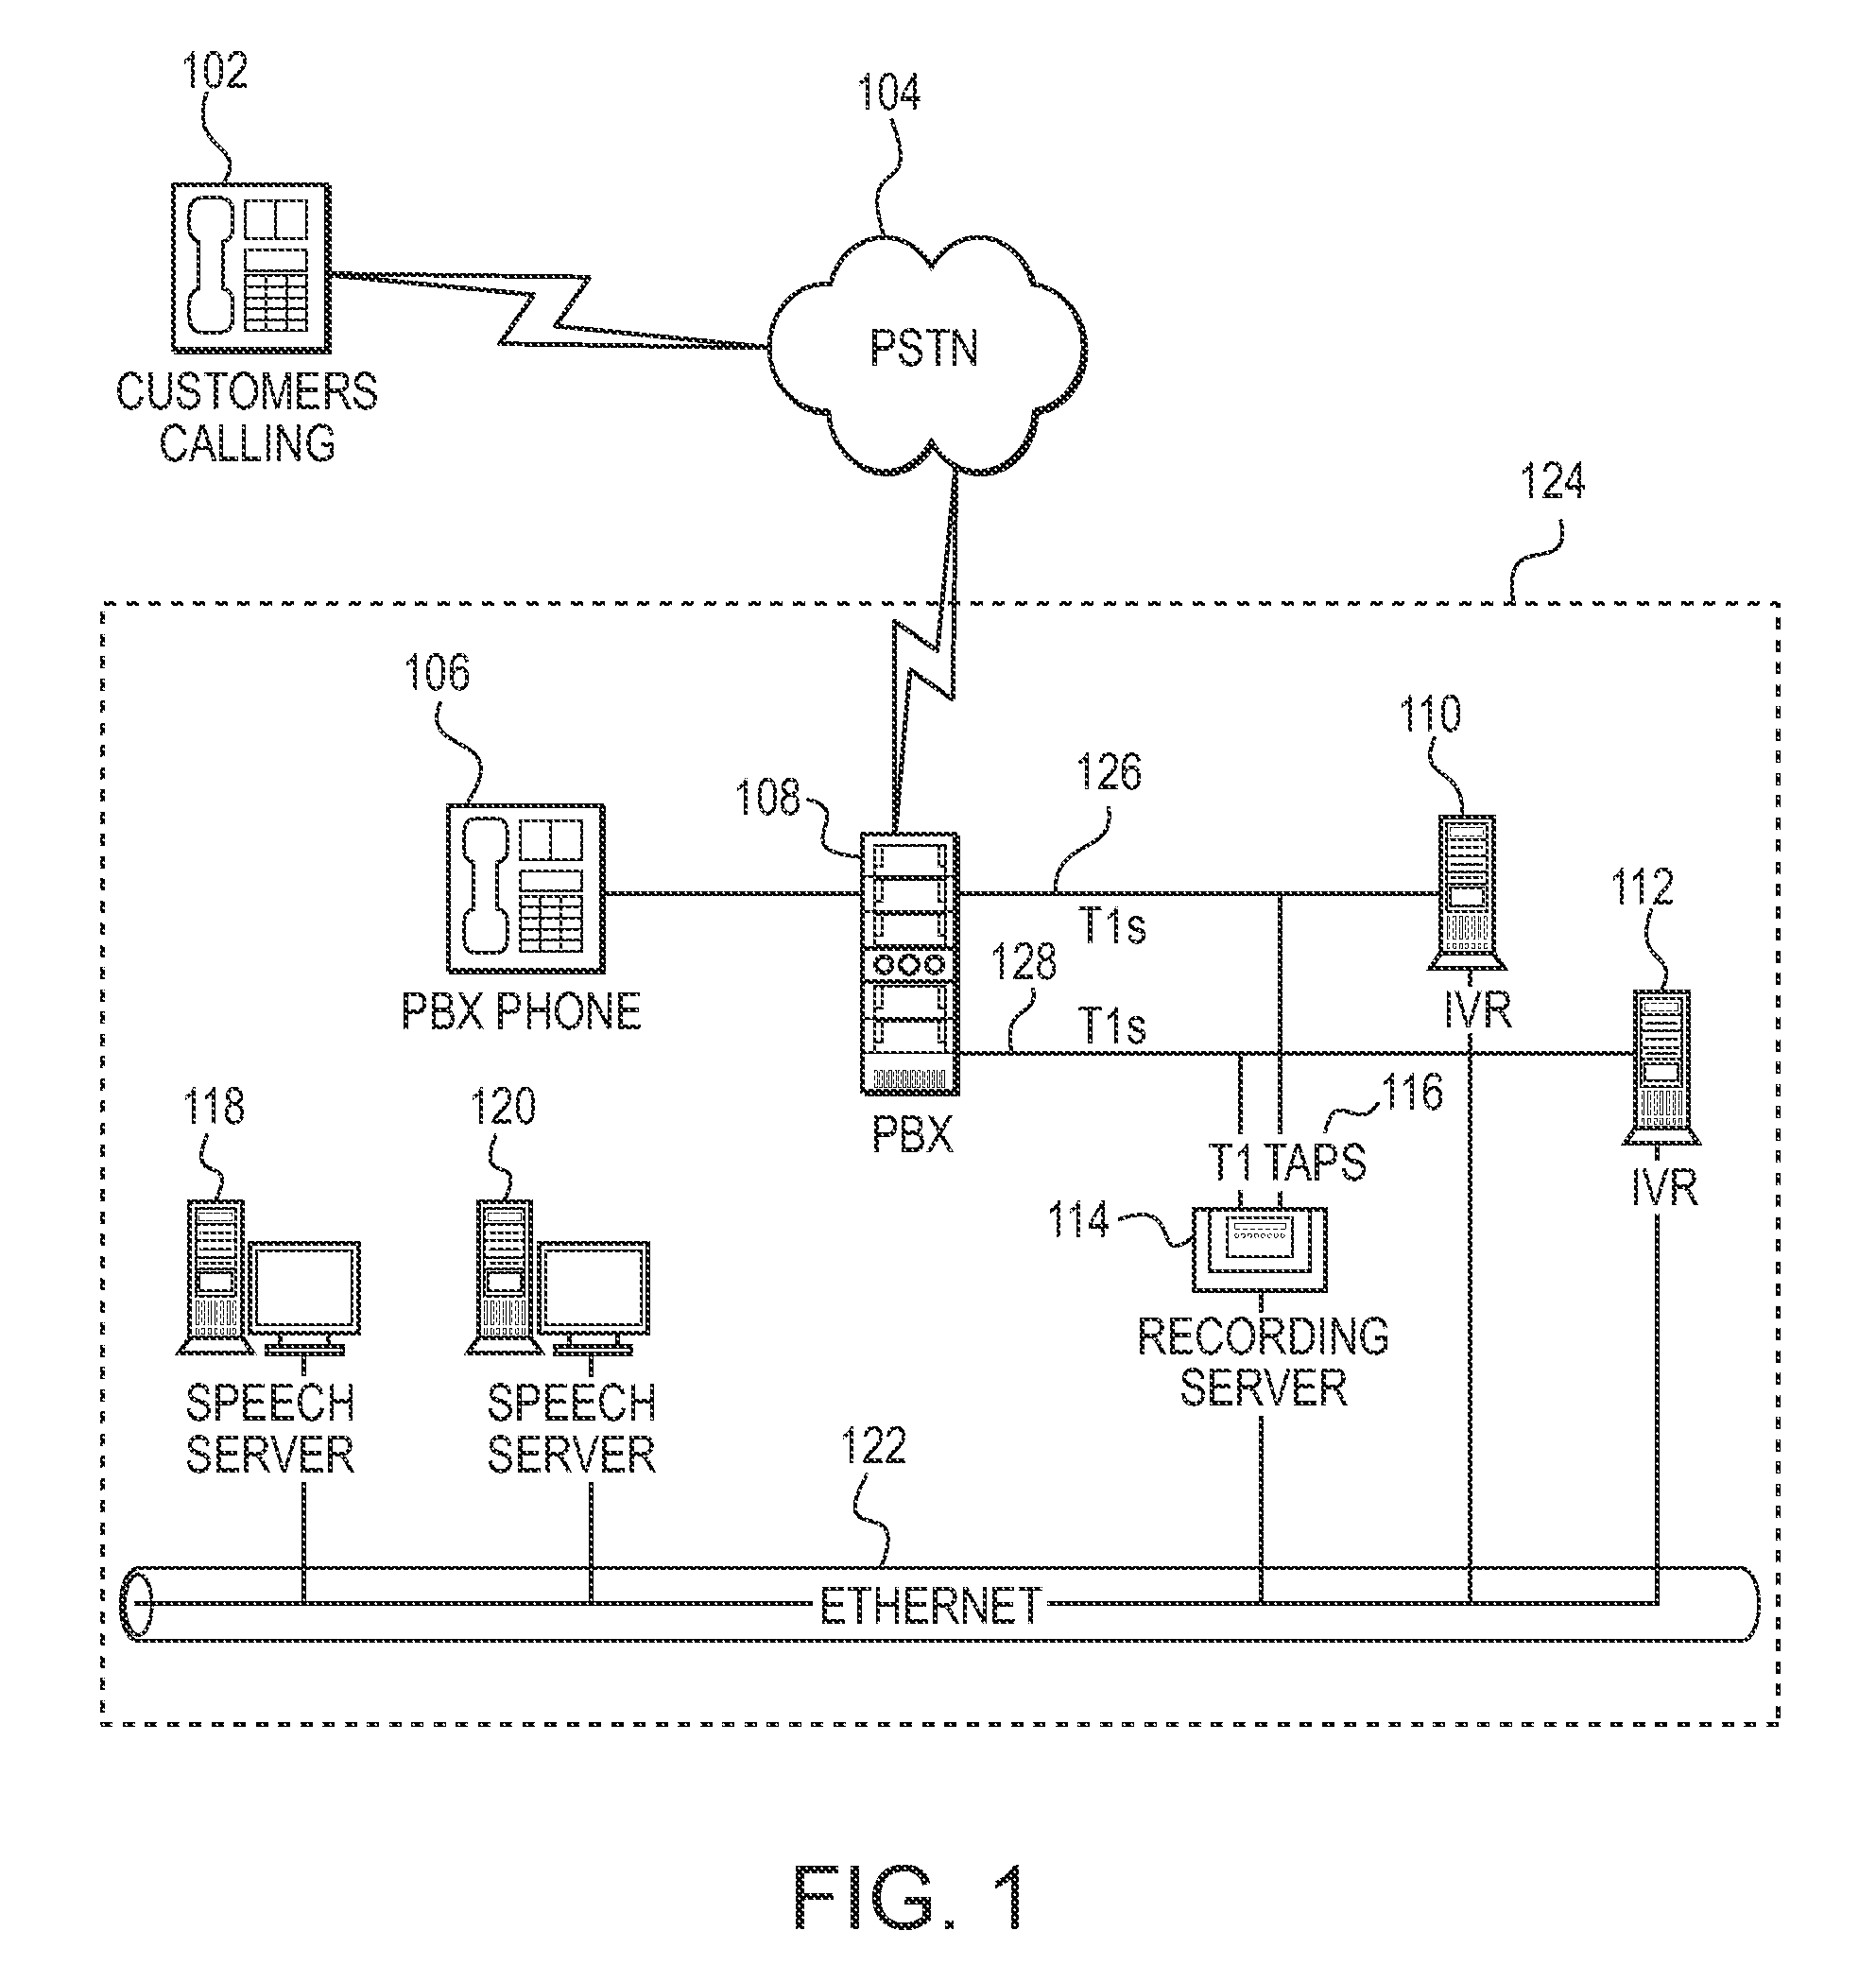 Systems and methods for NACHA compliant ACH transfers using an automated voice response system